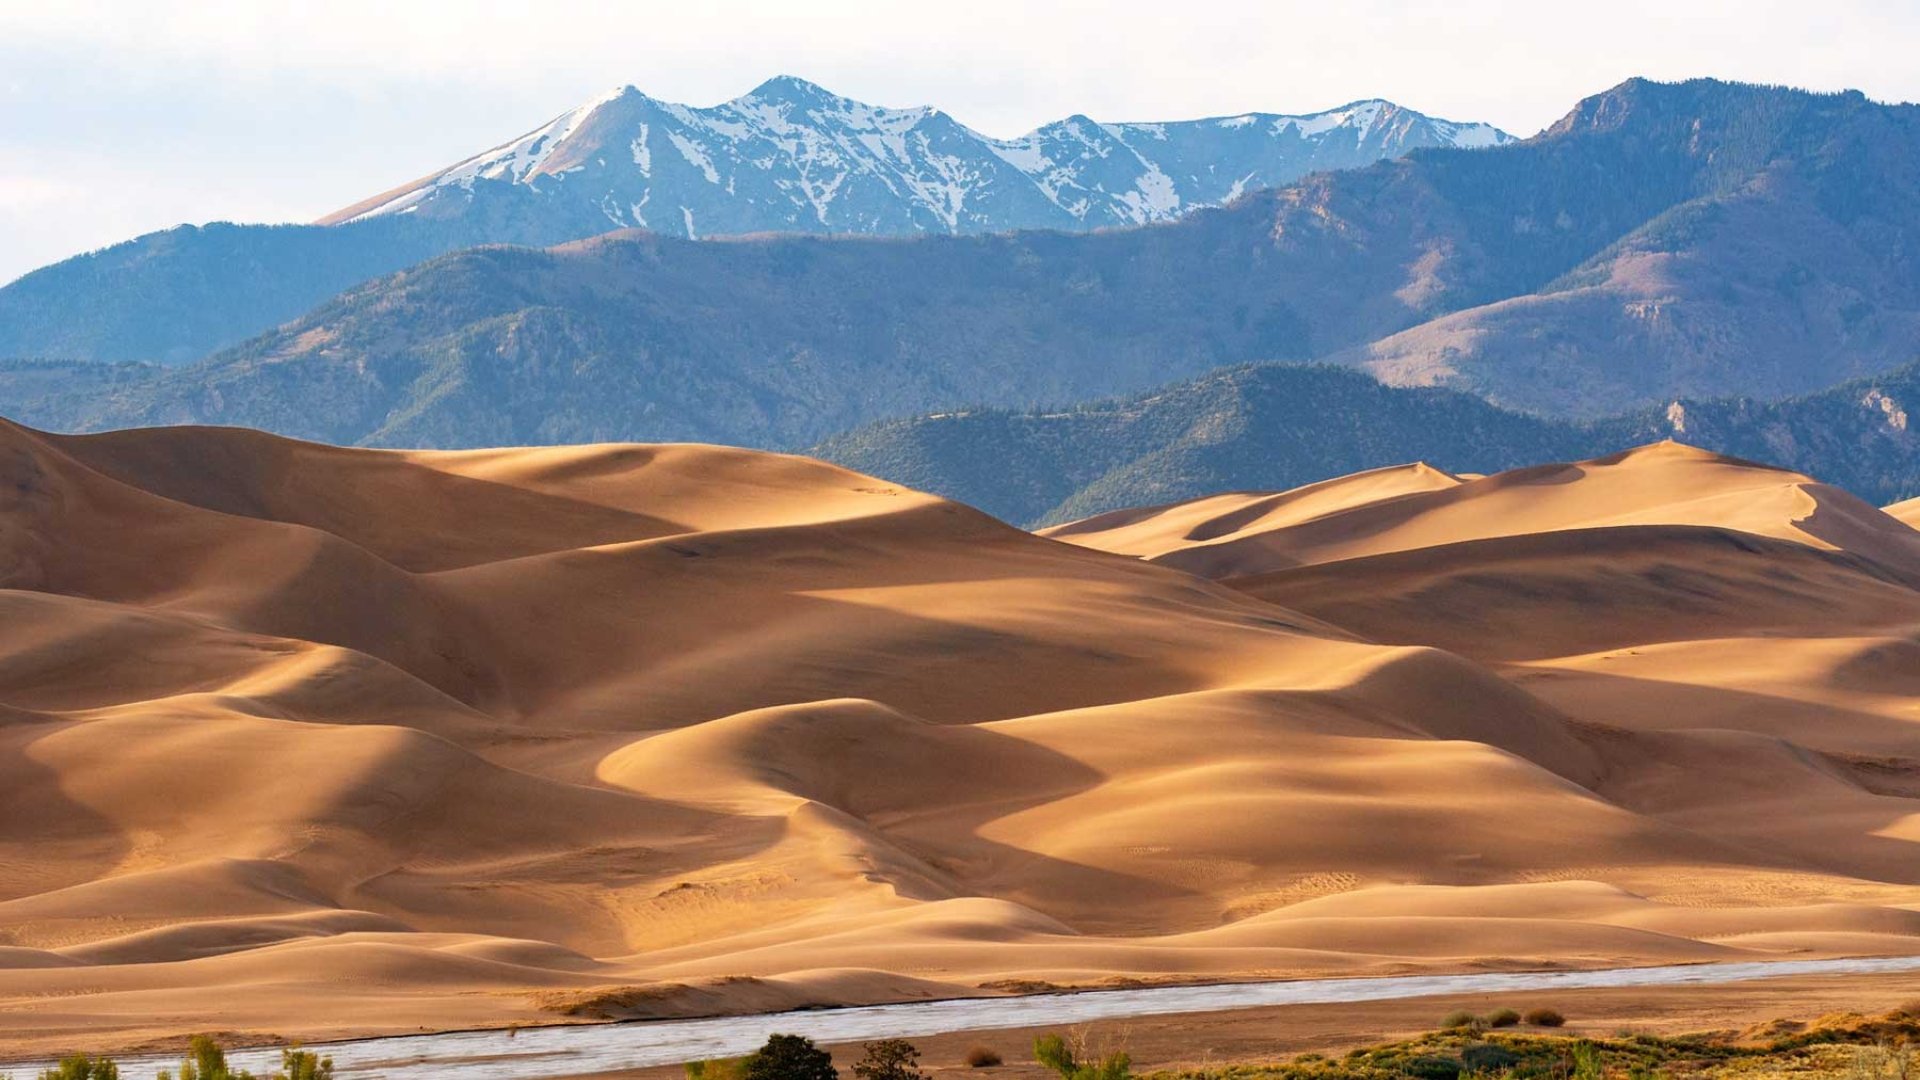 THE GREAT SAND DUNE NATIONAL PARK & PRESERVE